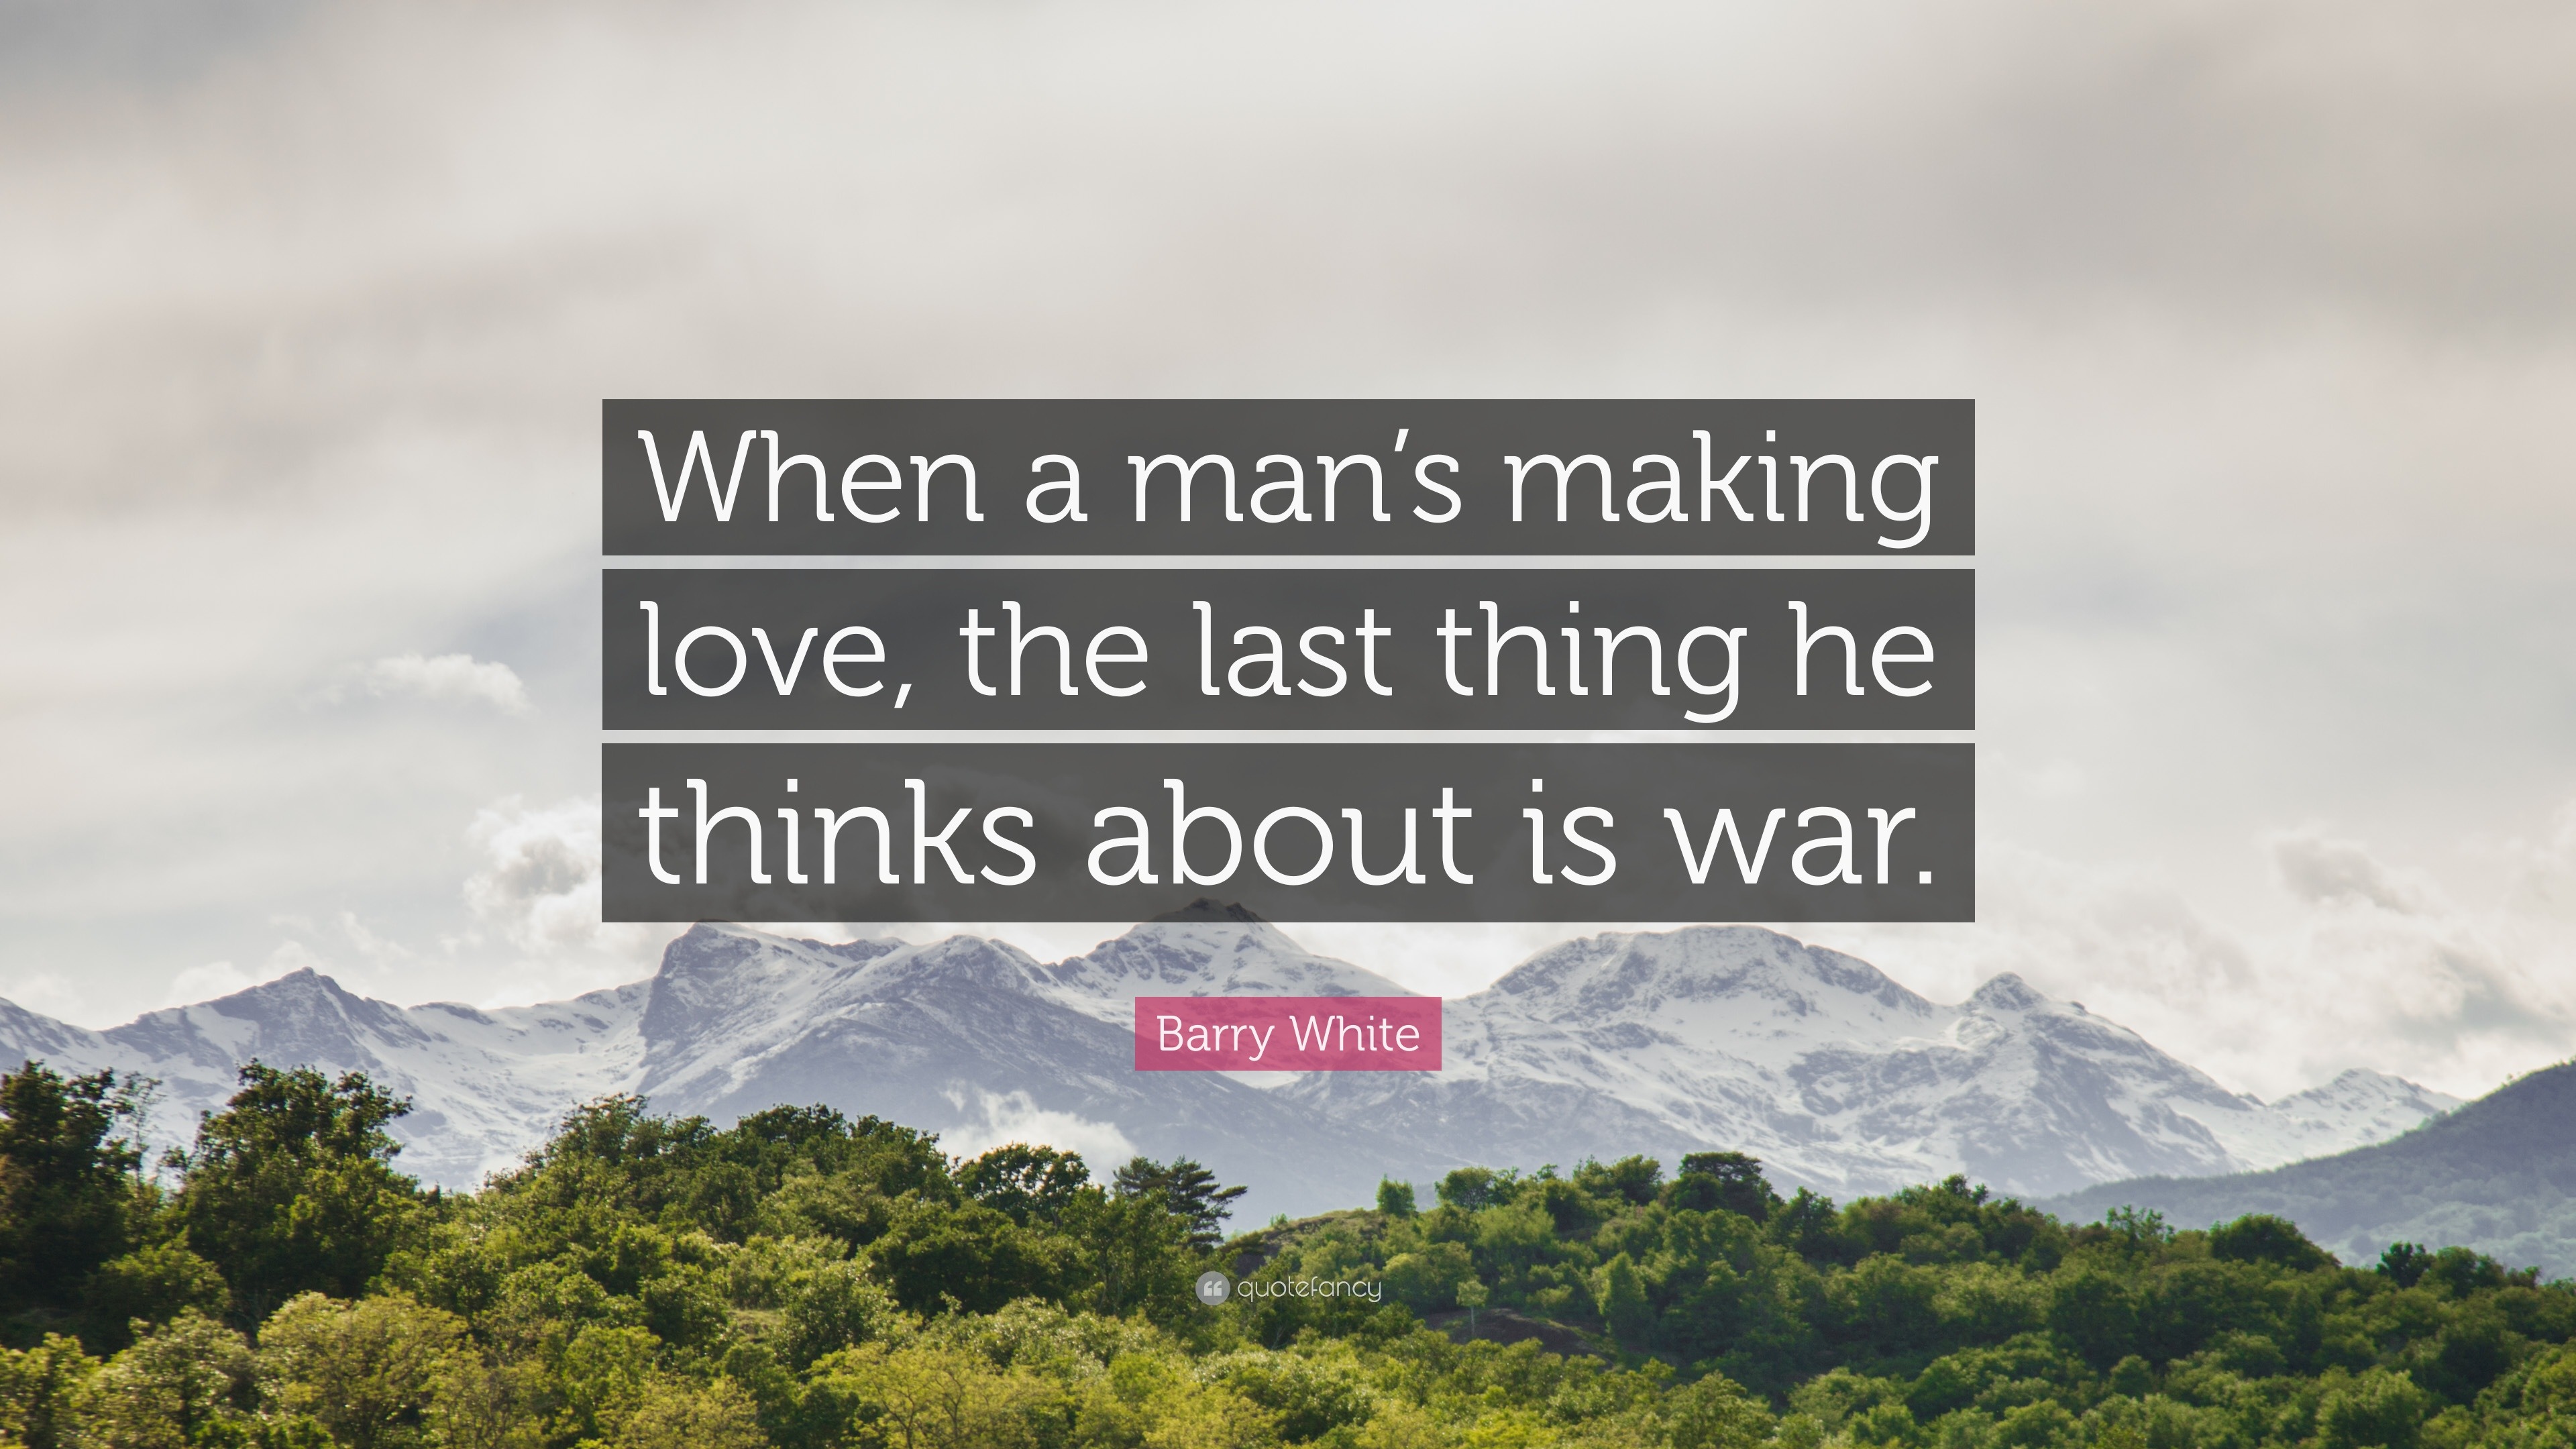 Barry White Quote “When a man s making love the last thing he thinks